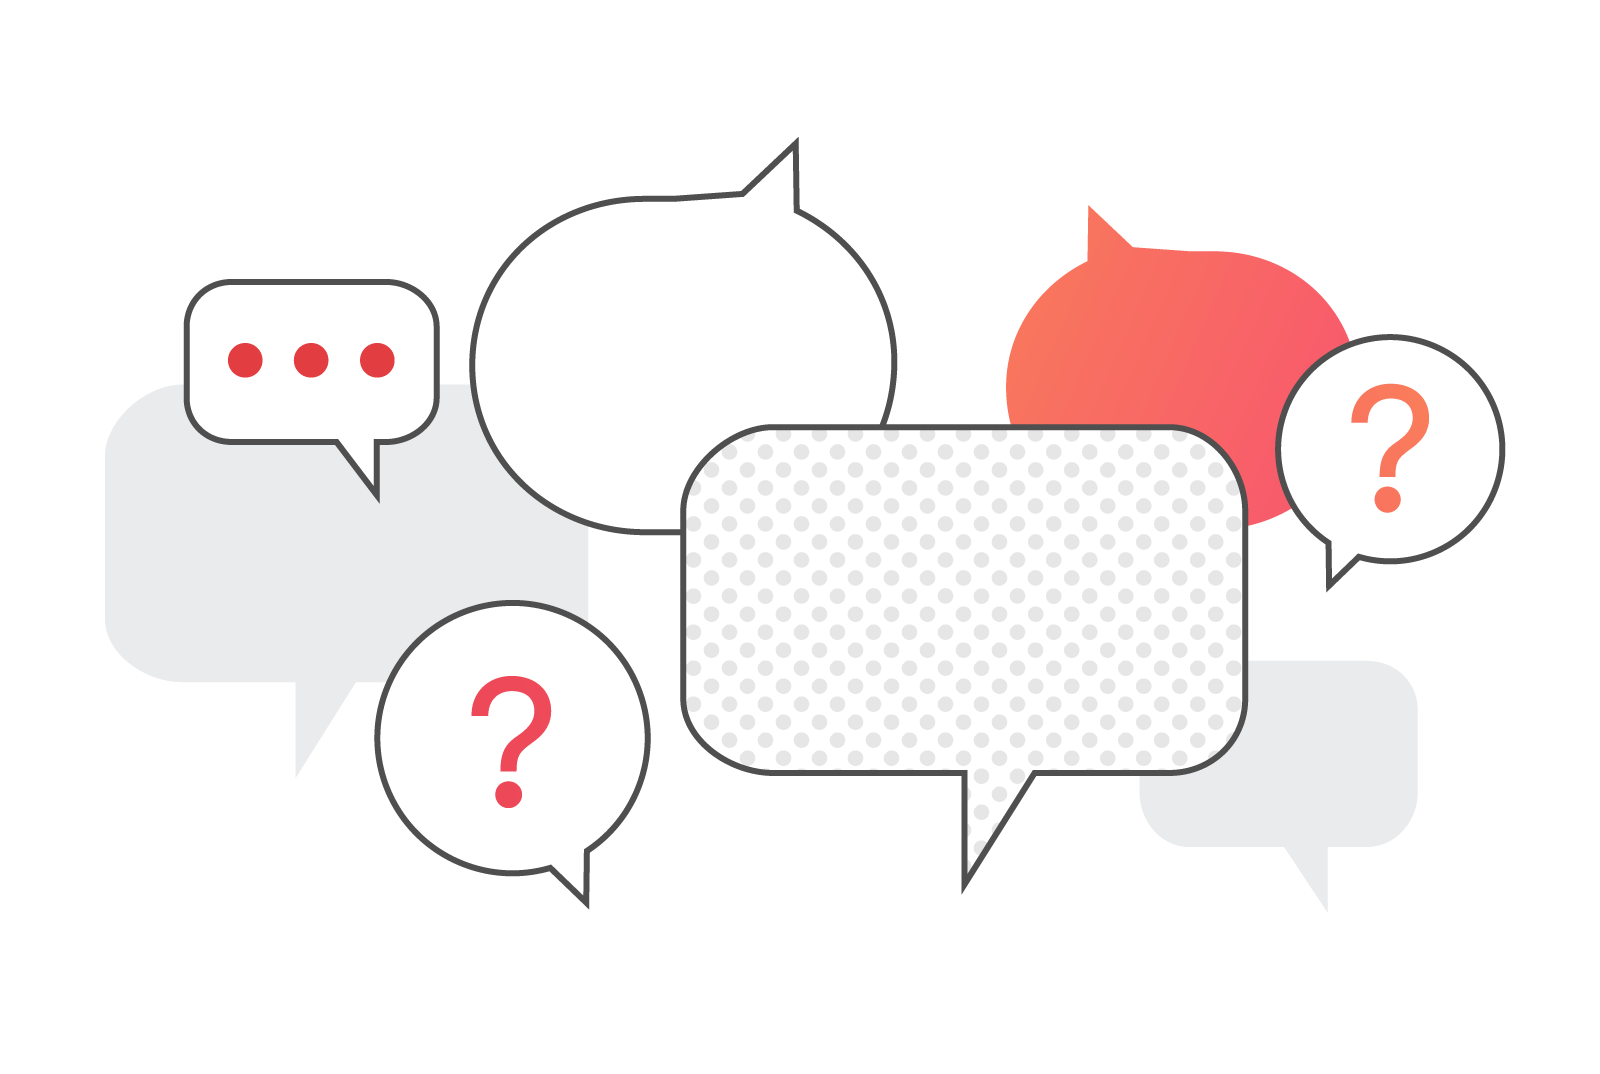 Ask questions to communicate effectively